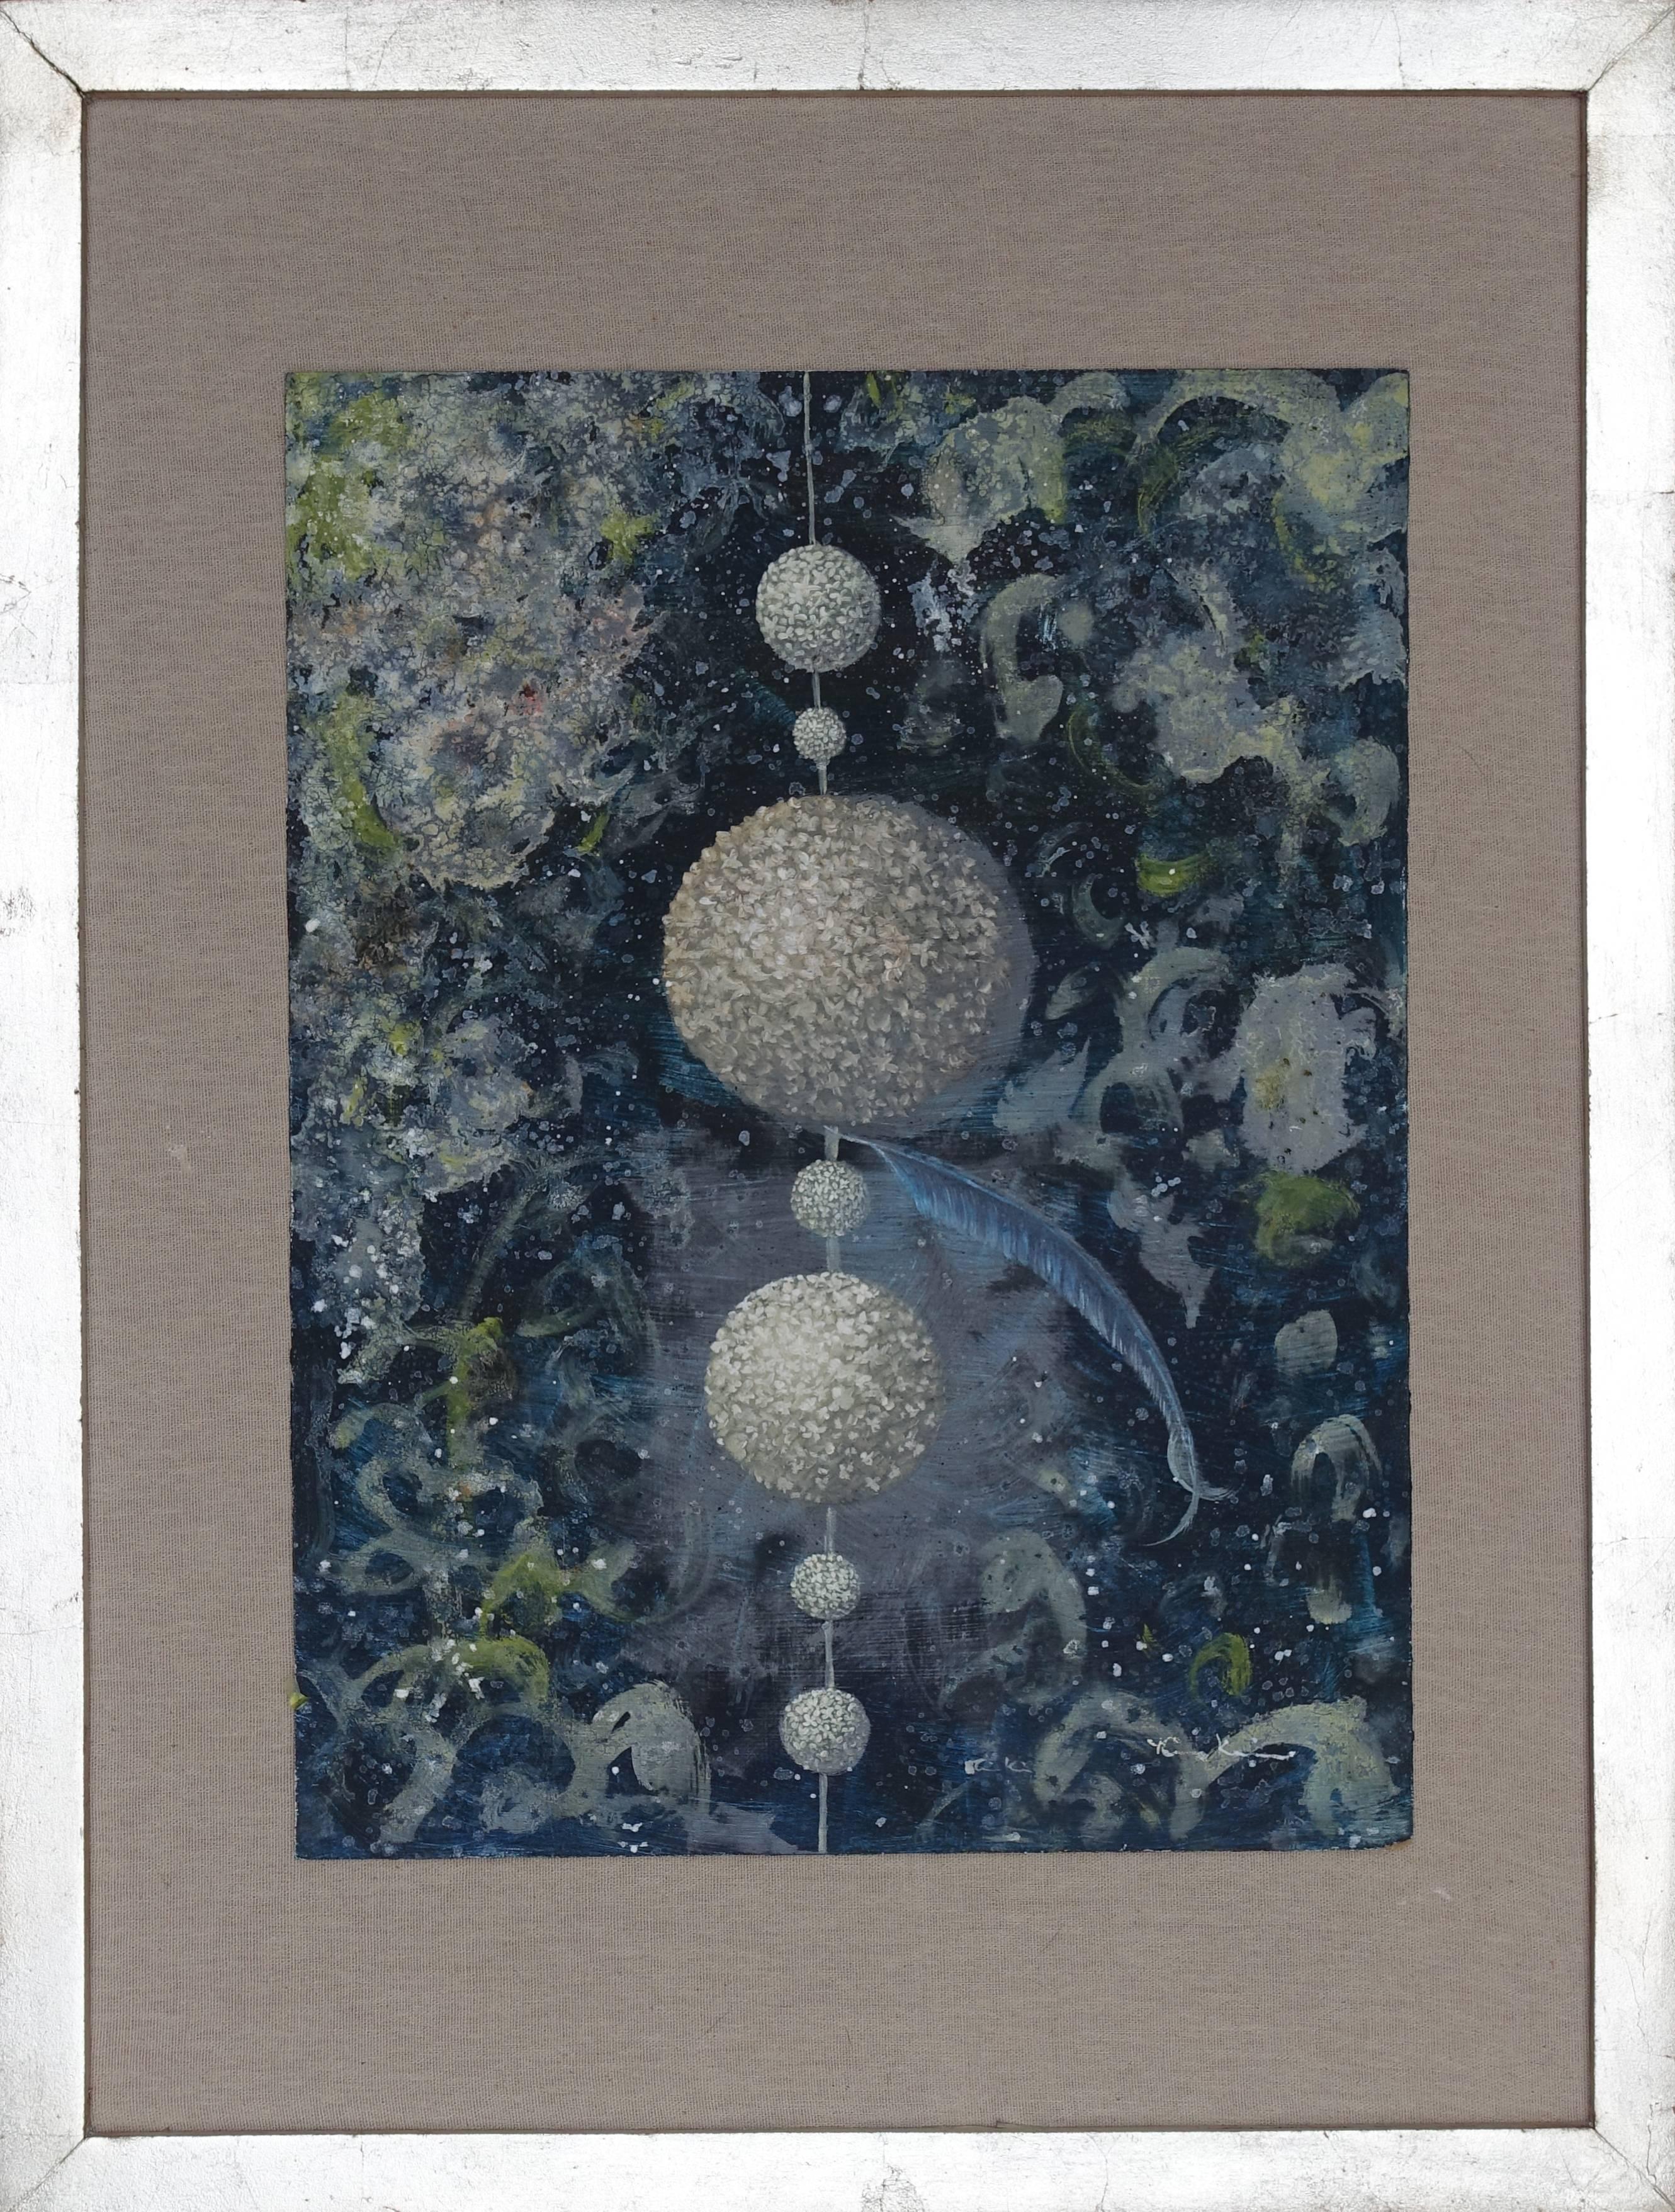 Spheres of Flowers with Feathers - Painting by Maike Kreichgauer